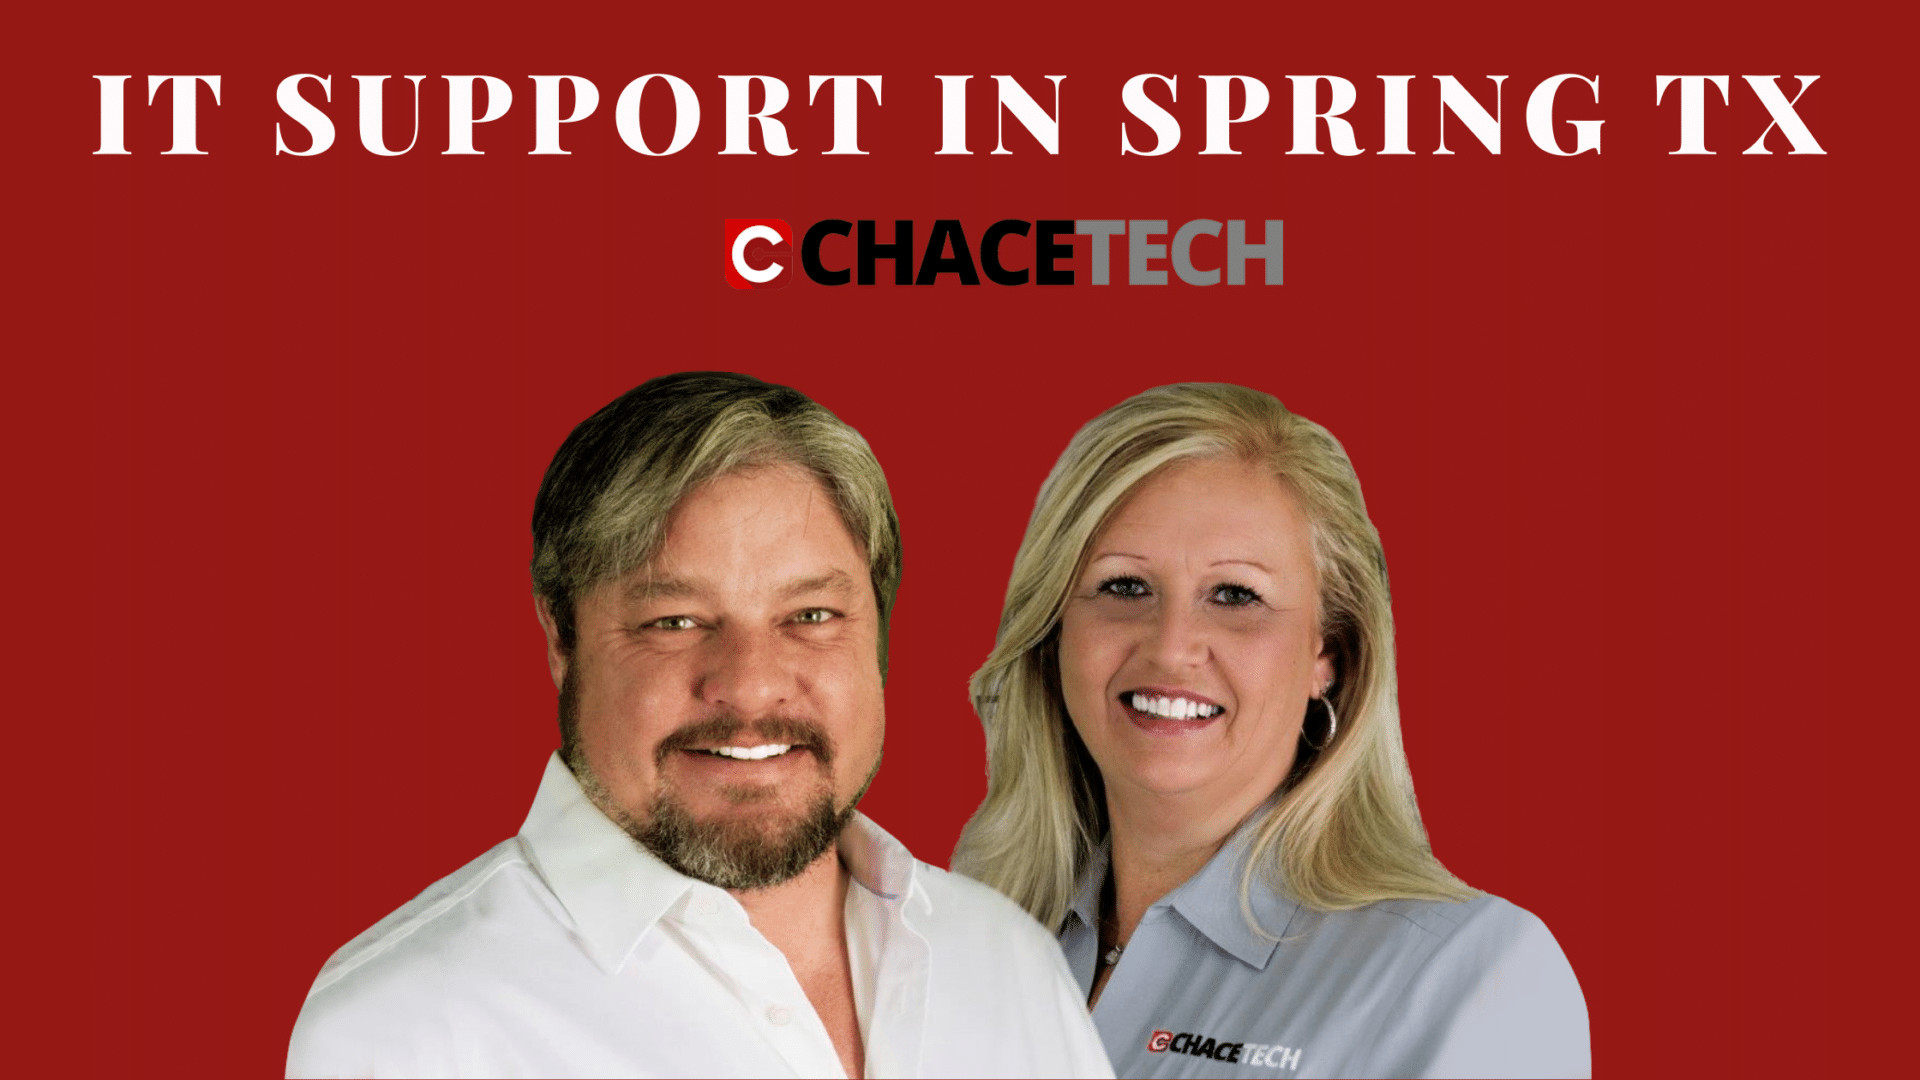 IT Support In Spring TX